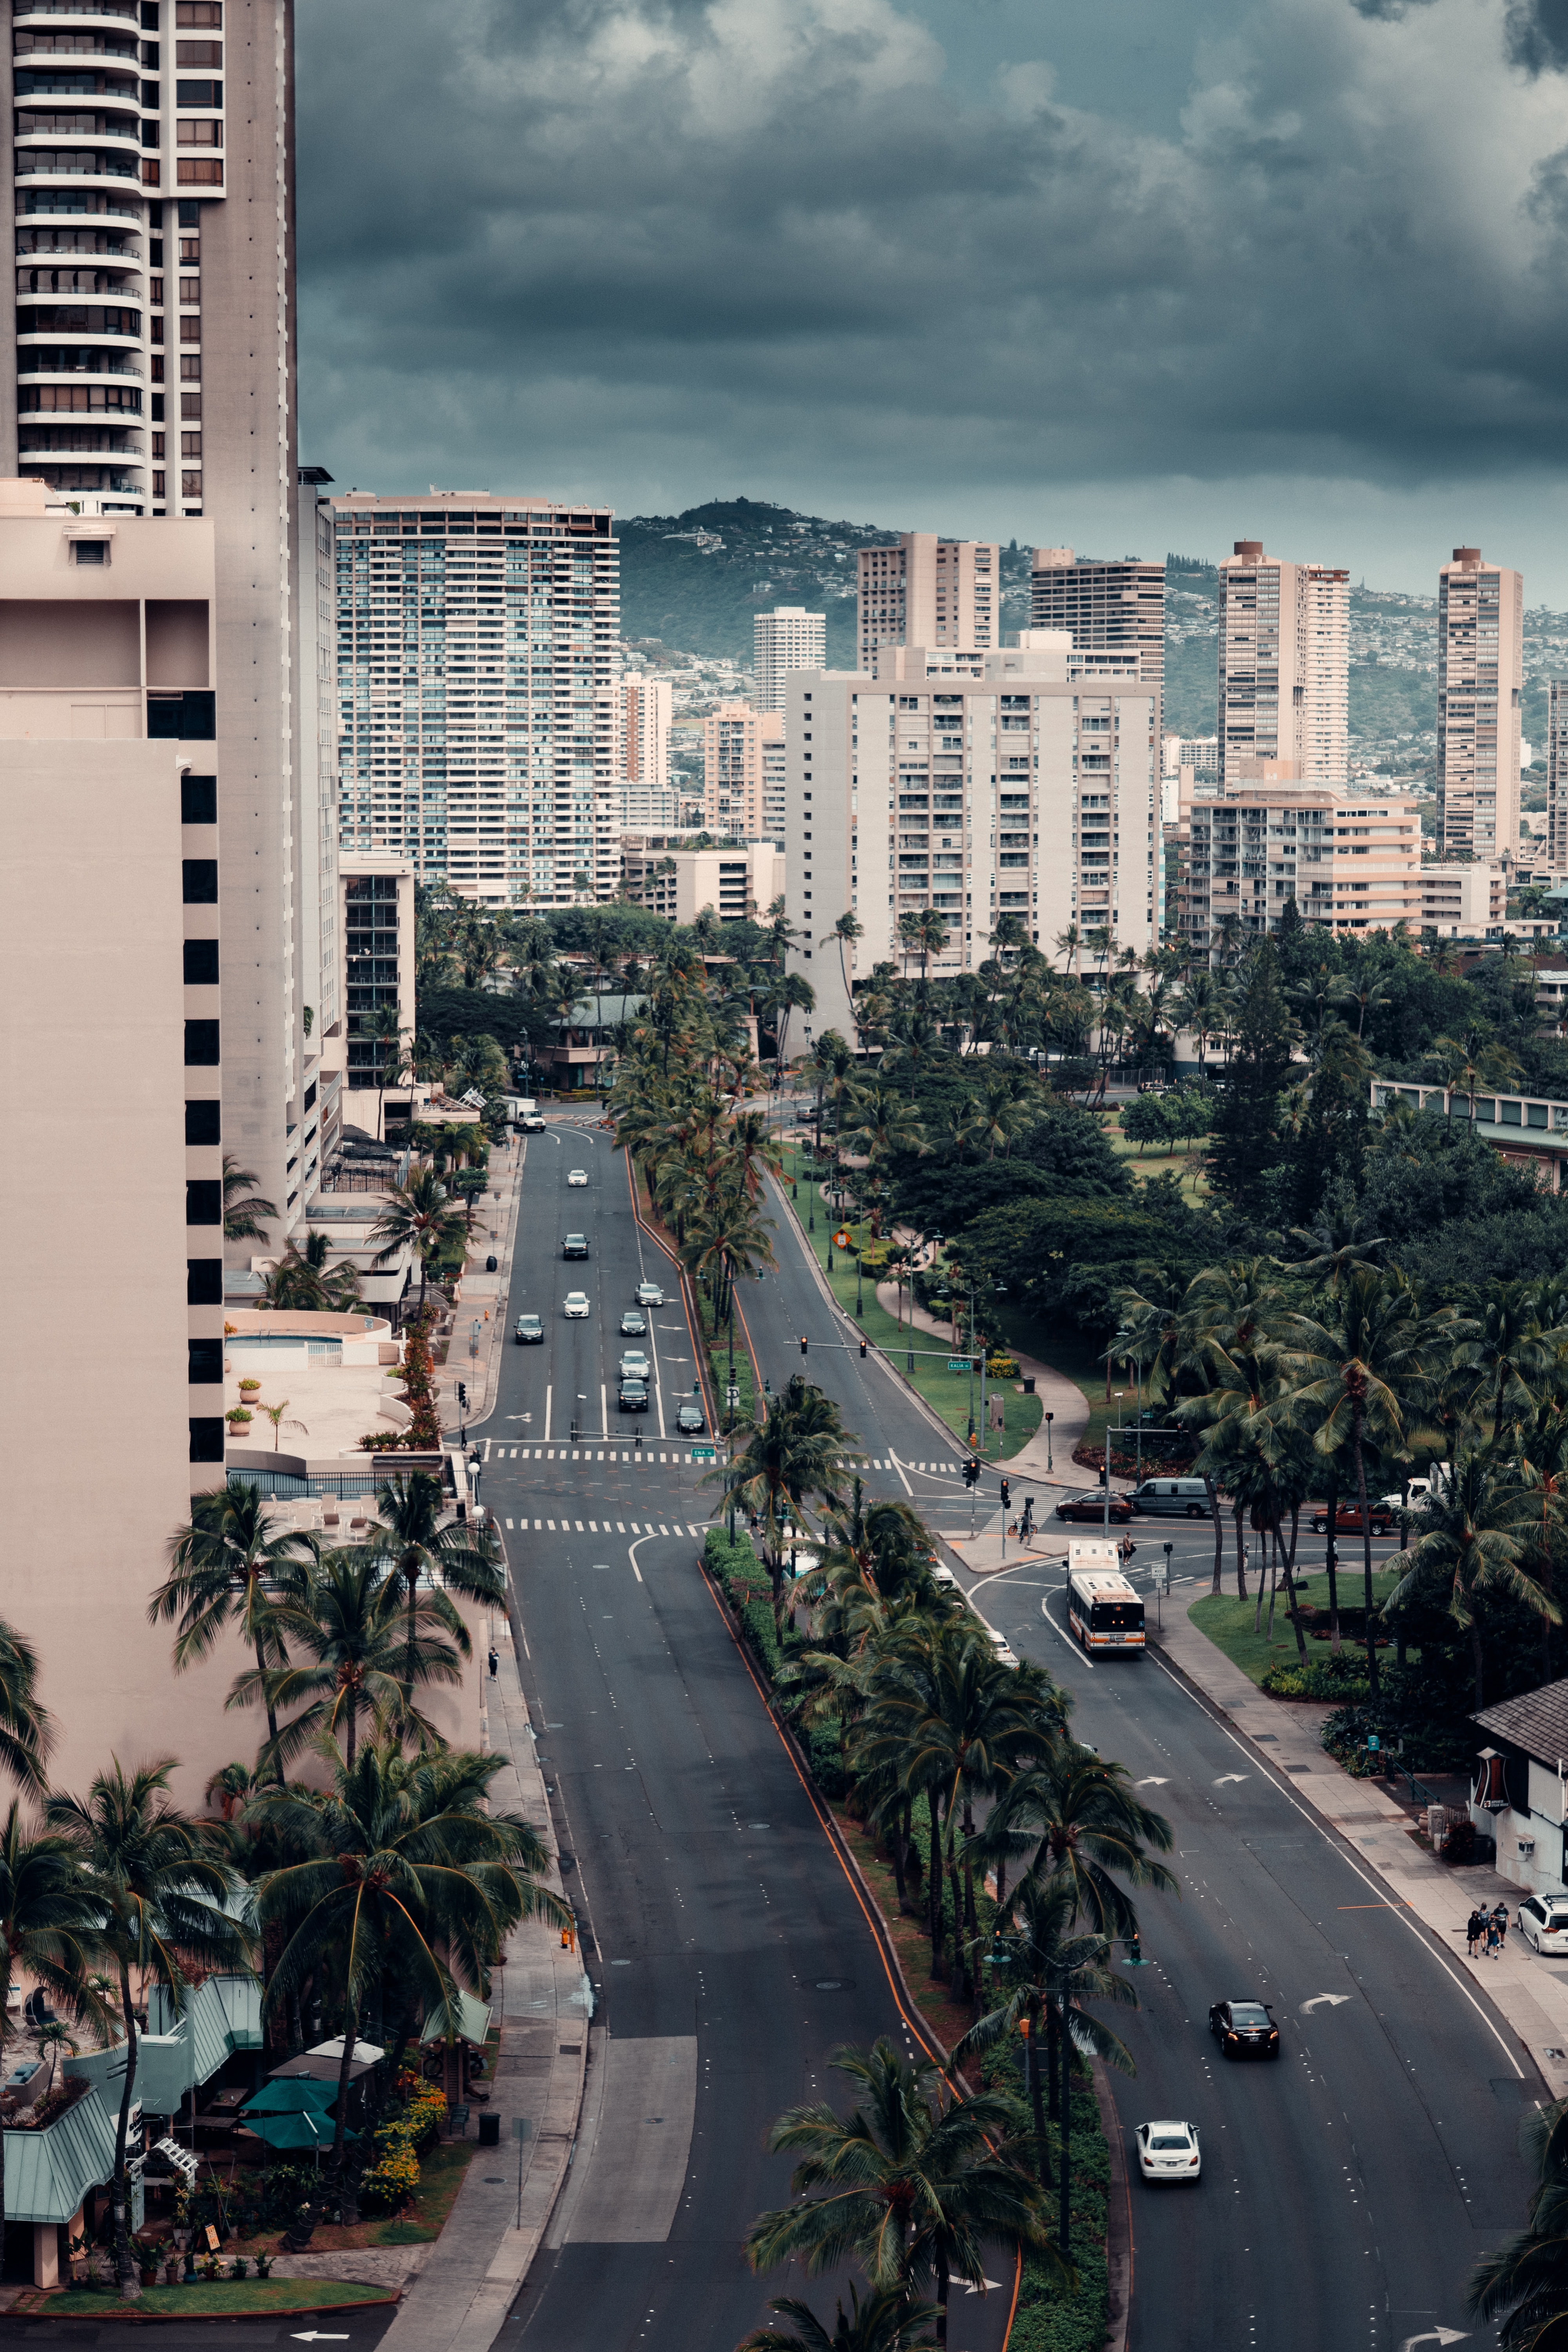 cities, palms, city, building, view from above, road